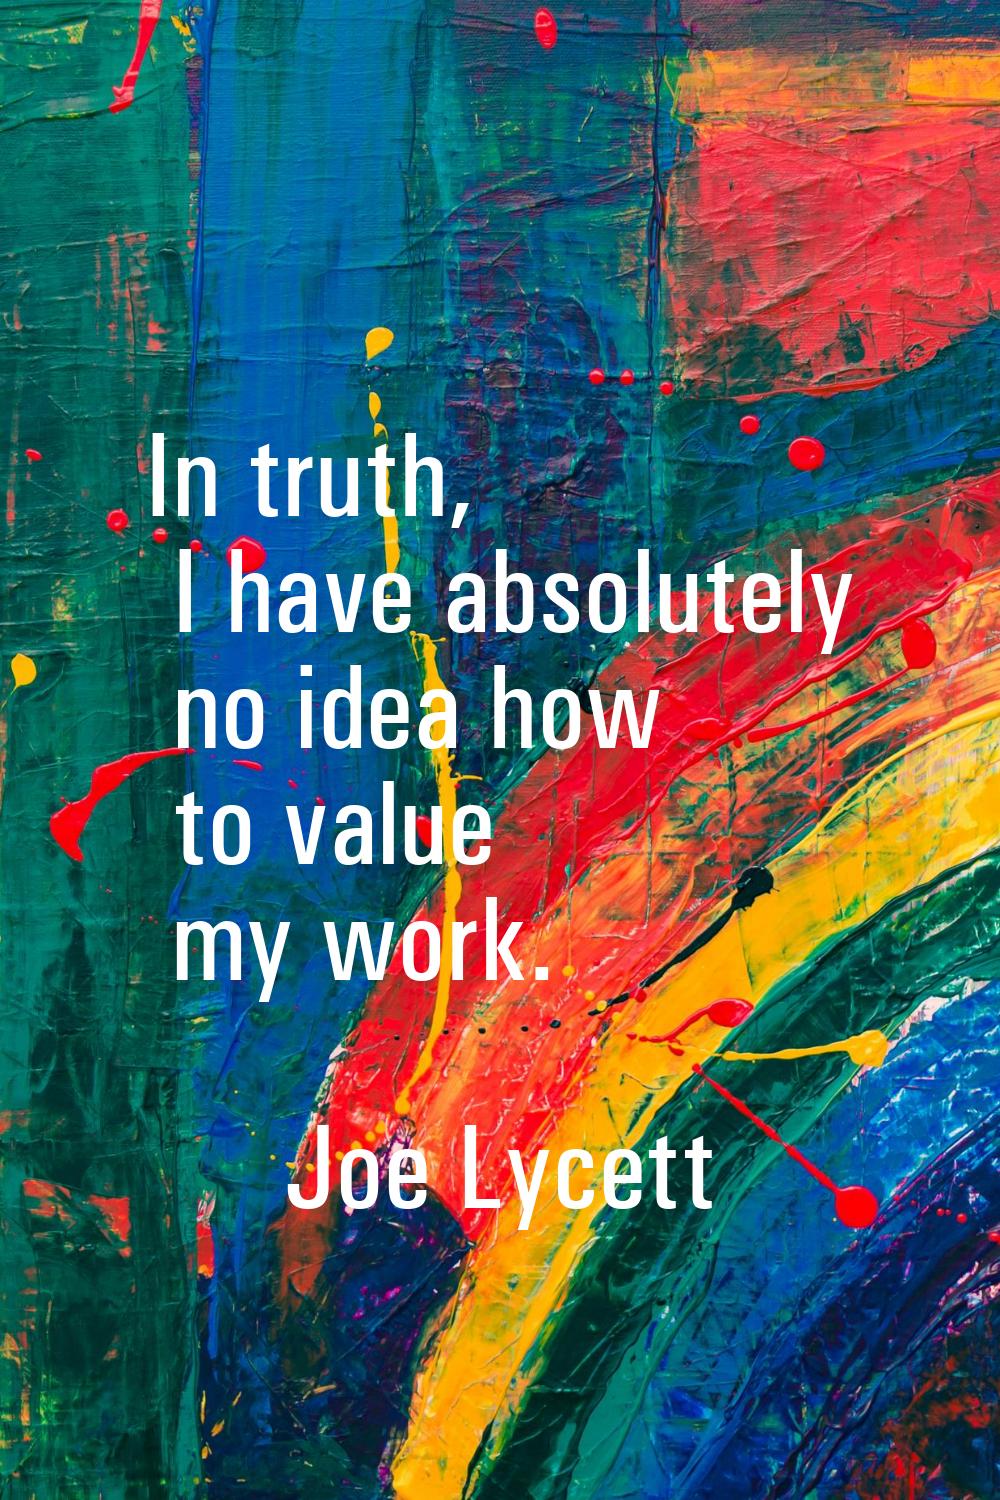 In truth, I have absolutely no idea how to value my work.